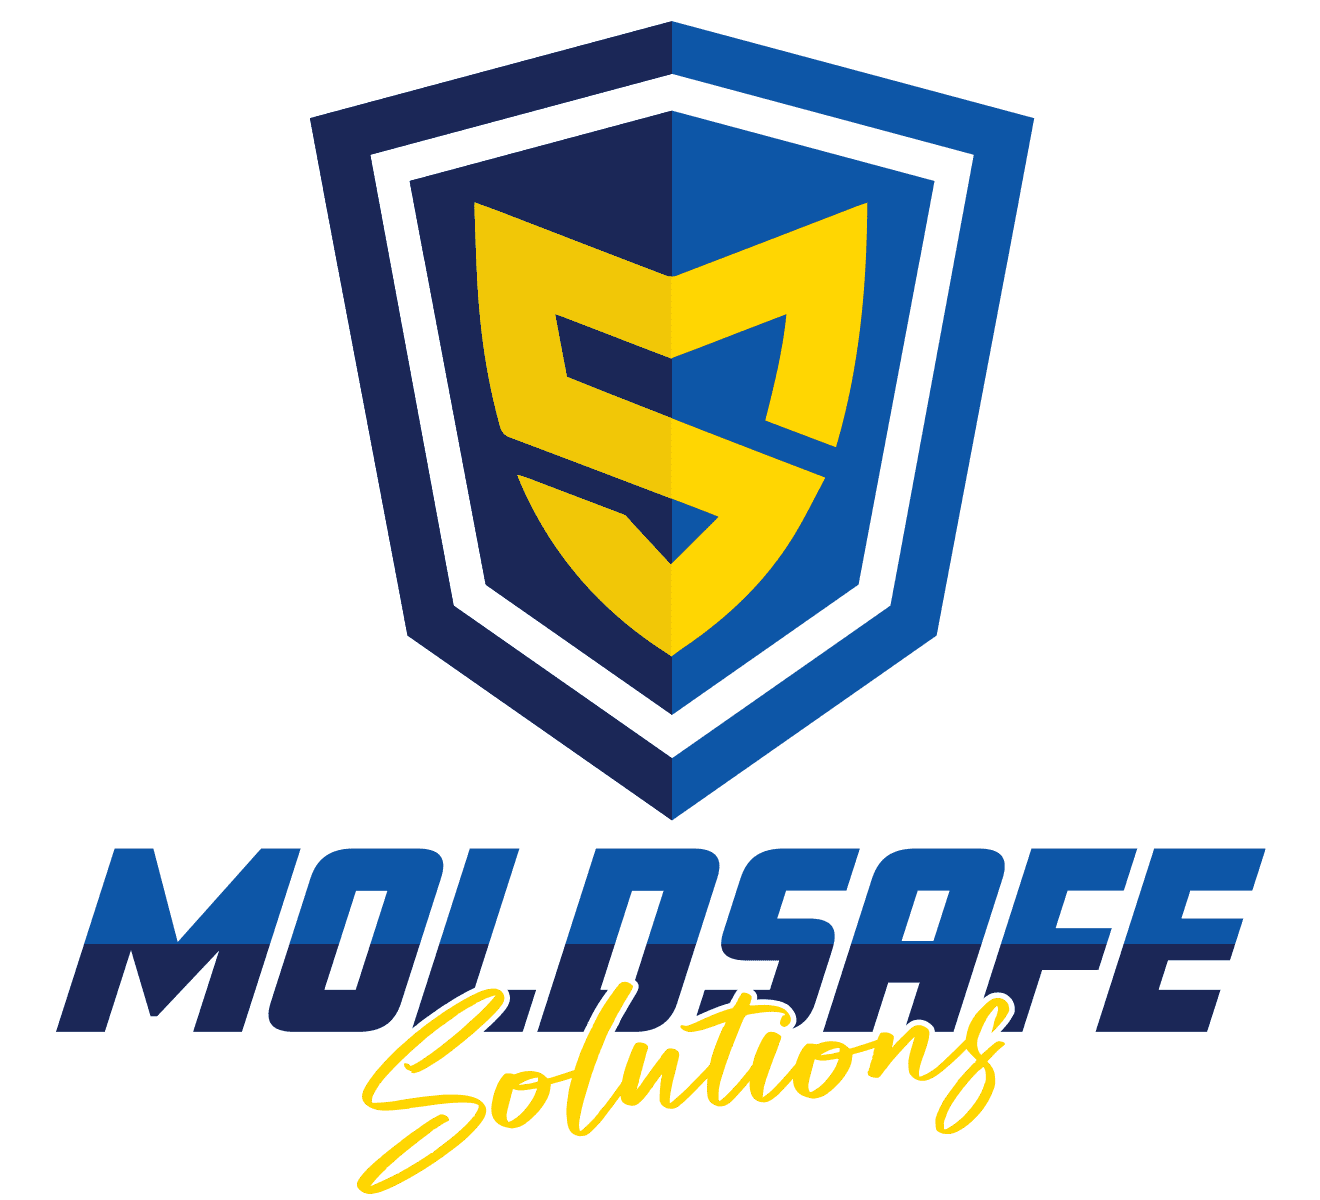 Mold Safe Solutions